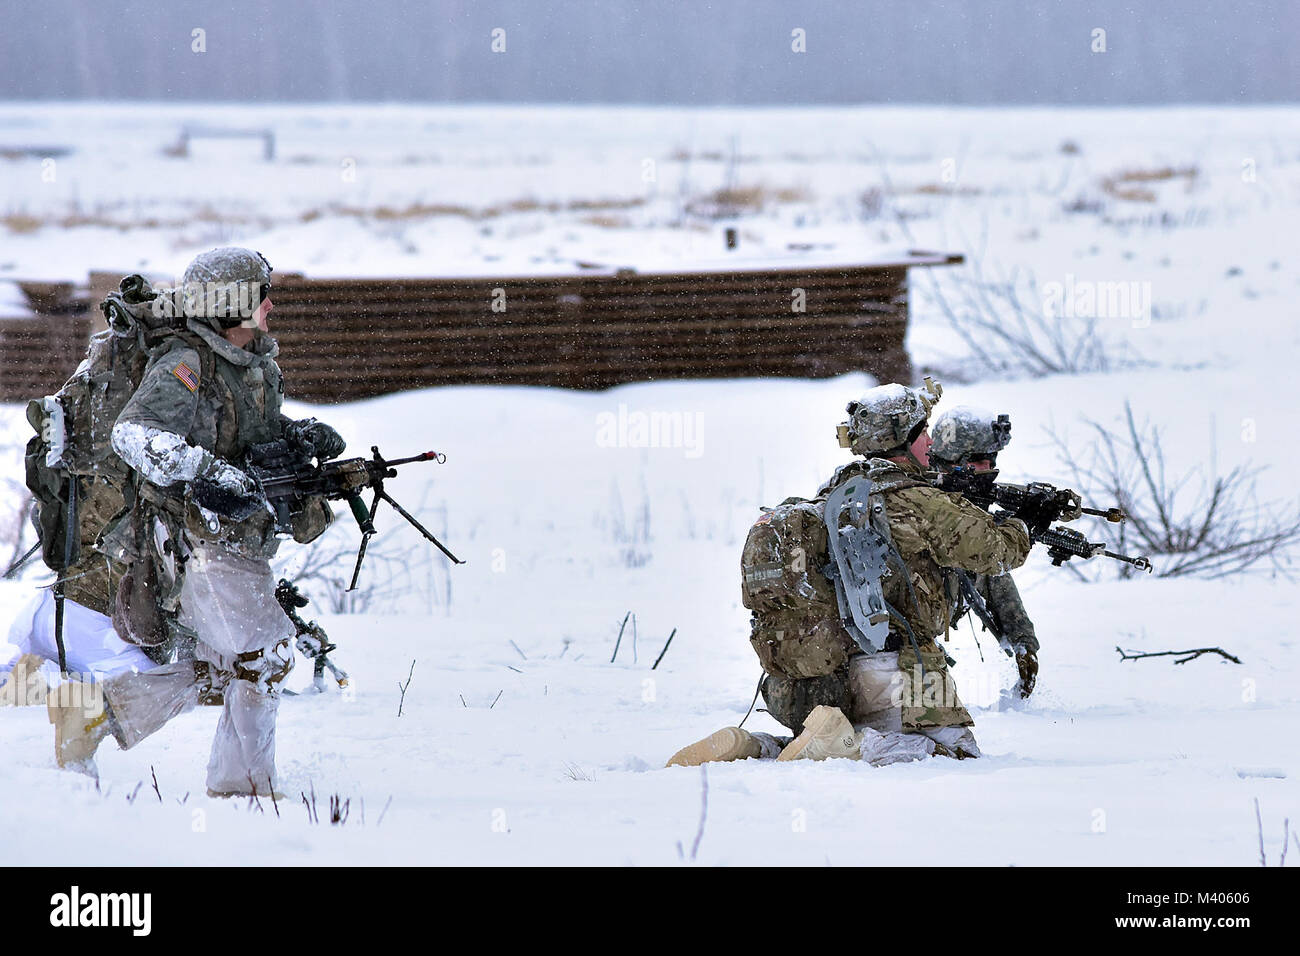 Soldiers from B Company, 1st Battalion, 5th Infantry Regiment, 1st Stryker Brigade Combat Team, 25th Infantry Division, react to a counter-attack during Operation Punchbowl, Feb. 6, 2018, at the multi-purpose training range on Joint Base Elmendorf-Richardson. A follow-on exercise to the short-notice deployment exercise Arctic Thrust, Punchbowl allowed 1-5 Infantry the opportunity to train for a battalion combined arms live-fire exercise on JBER ranges, nearly 350 miles from their home station at Fort Wainwright. (Army photo/John Pennell) Stock Photo